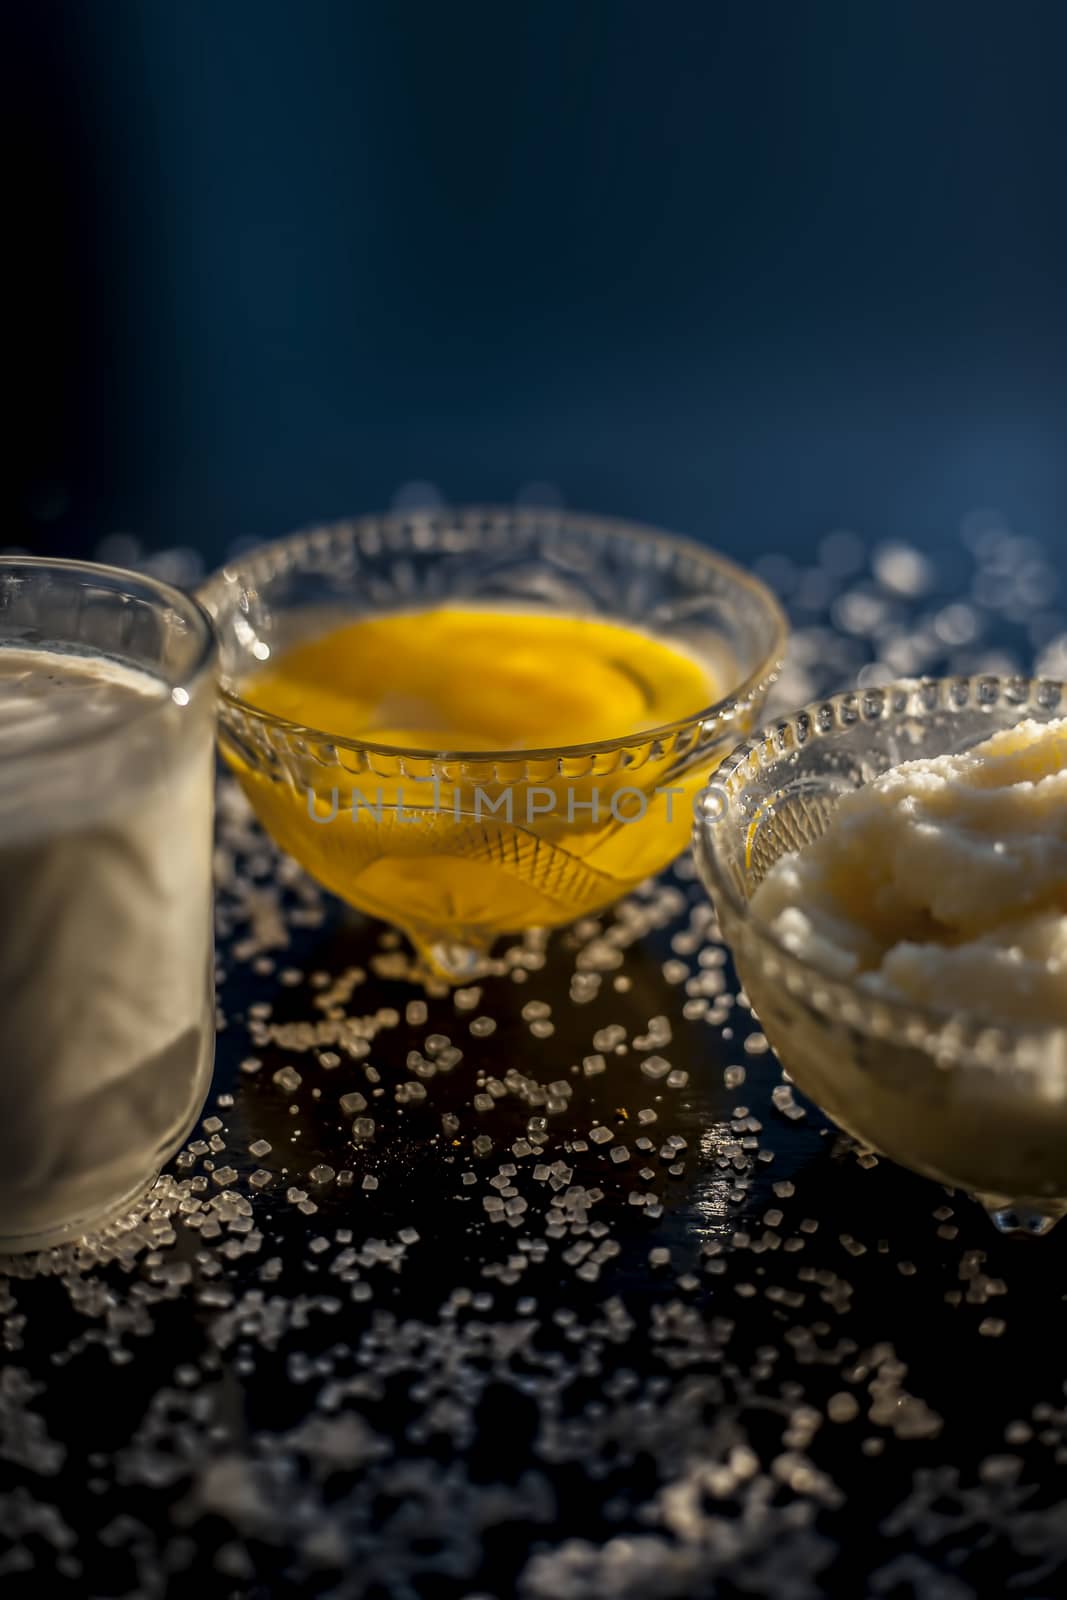 Close up shot of ayurvedic method or calcium supplement on the black surface consisting of raw eggs, milk, and ghee or clarified butter along with some sugar as a sweetener.